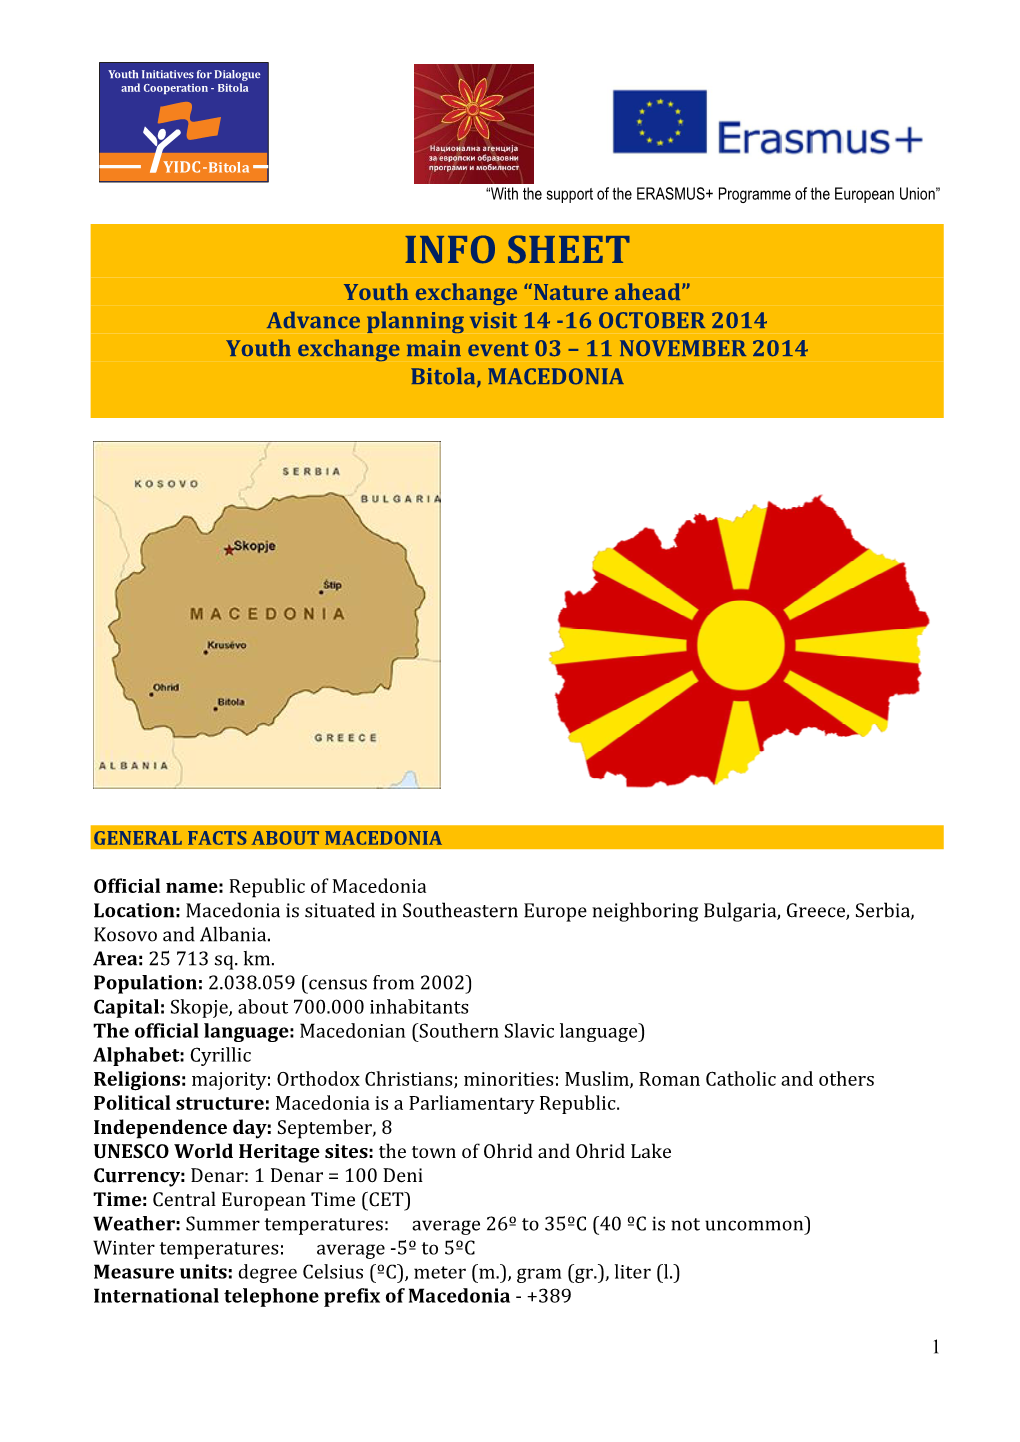 INFO SHEET Youth Exchange “Nature Ahead” Advance Planning Visit 14 -16 OCTOBER 2014 Youth Exchange Main Event 03 – 11 NOVEMBER 2014 Bitola, MACEDONIA